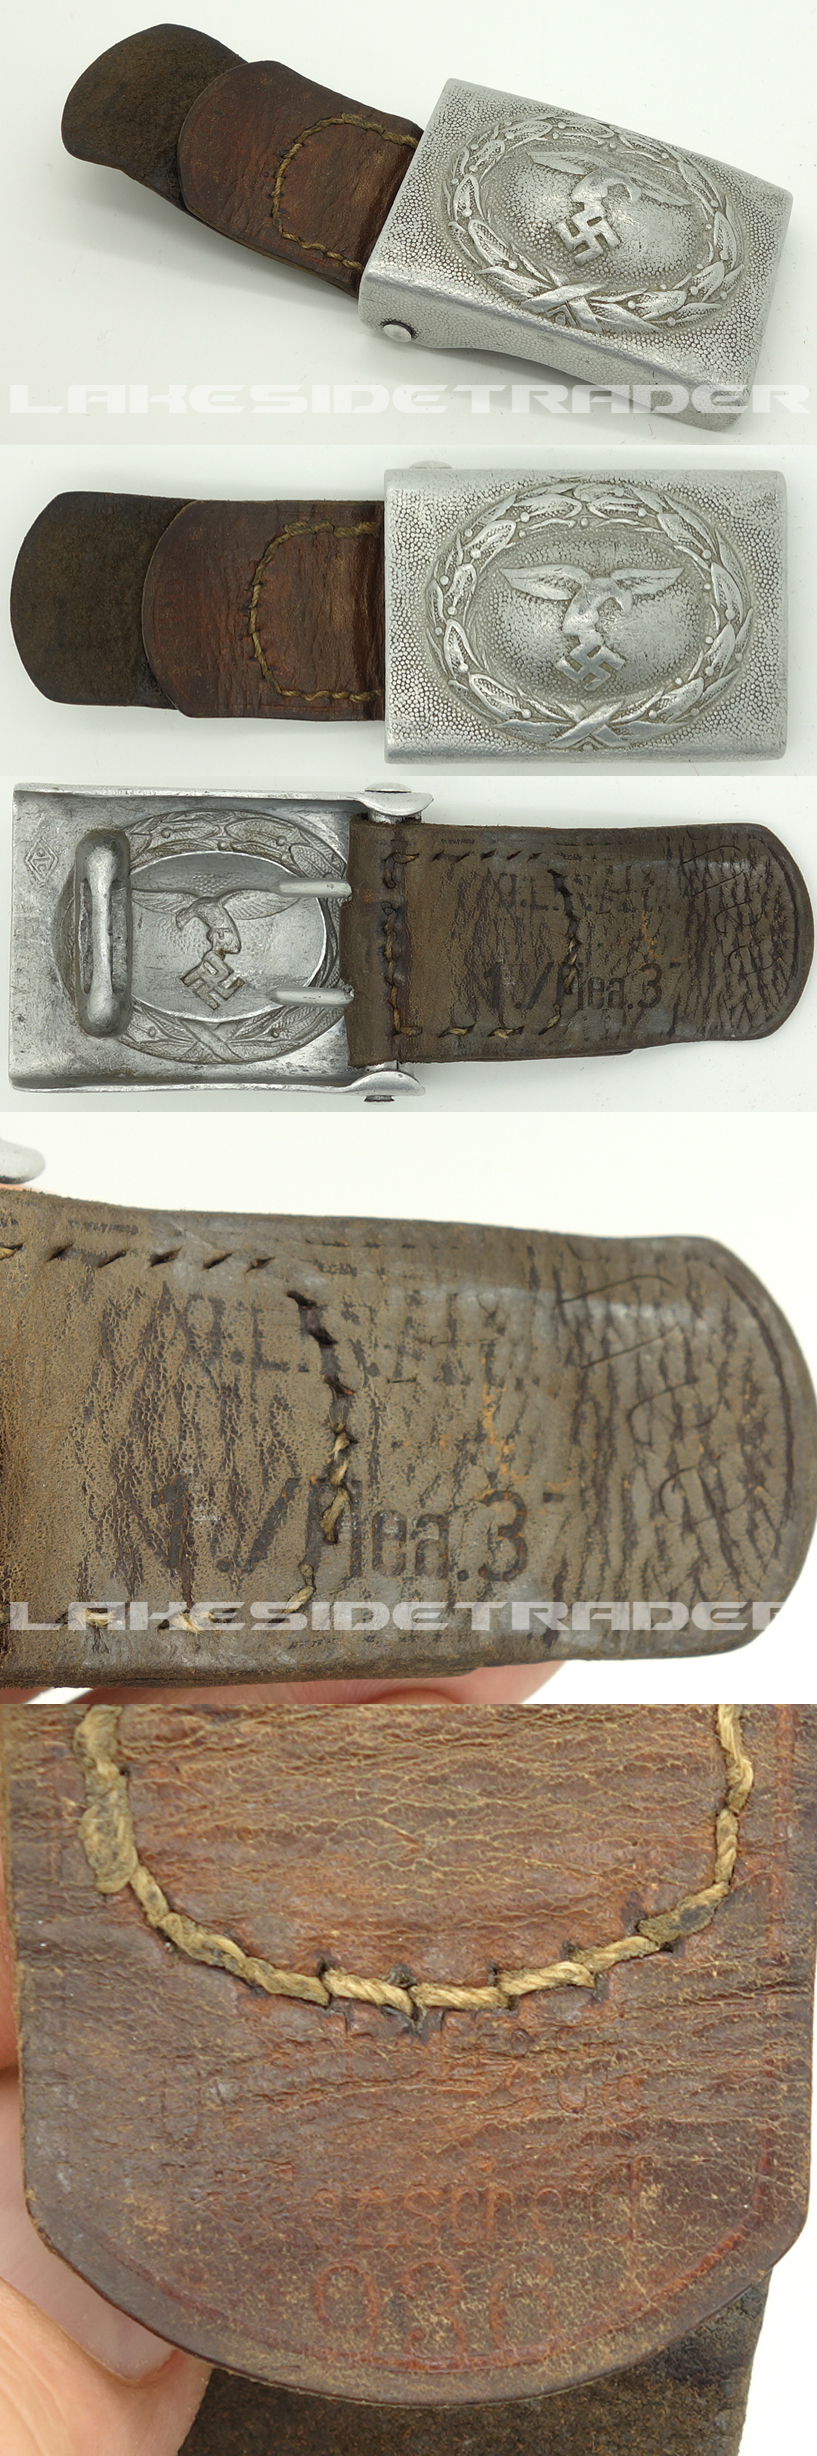 Early quadruple marked Luftwaffe Buckle by OLC | Lakesidetrader